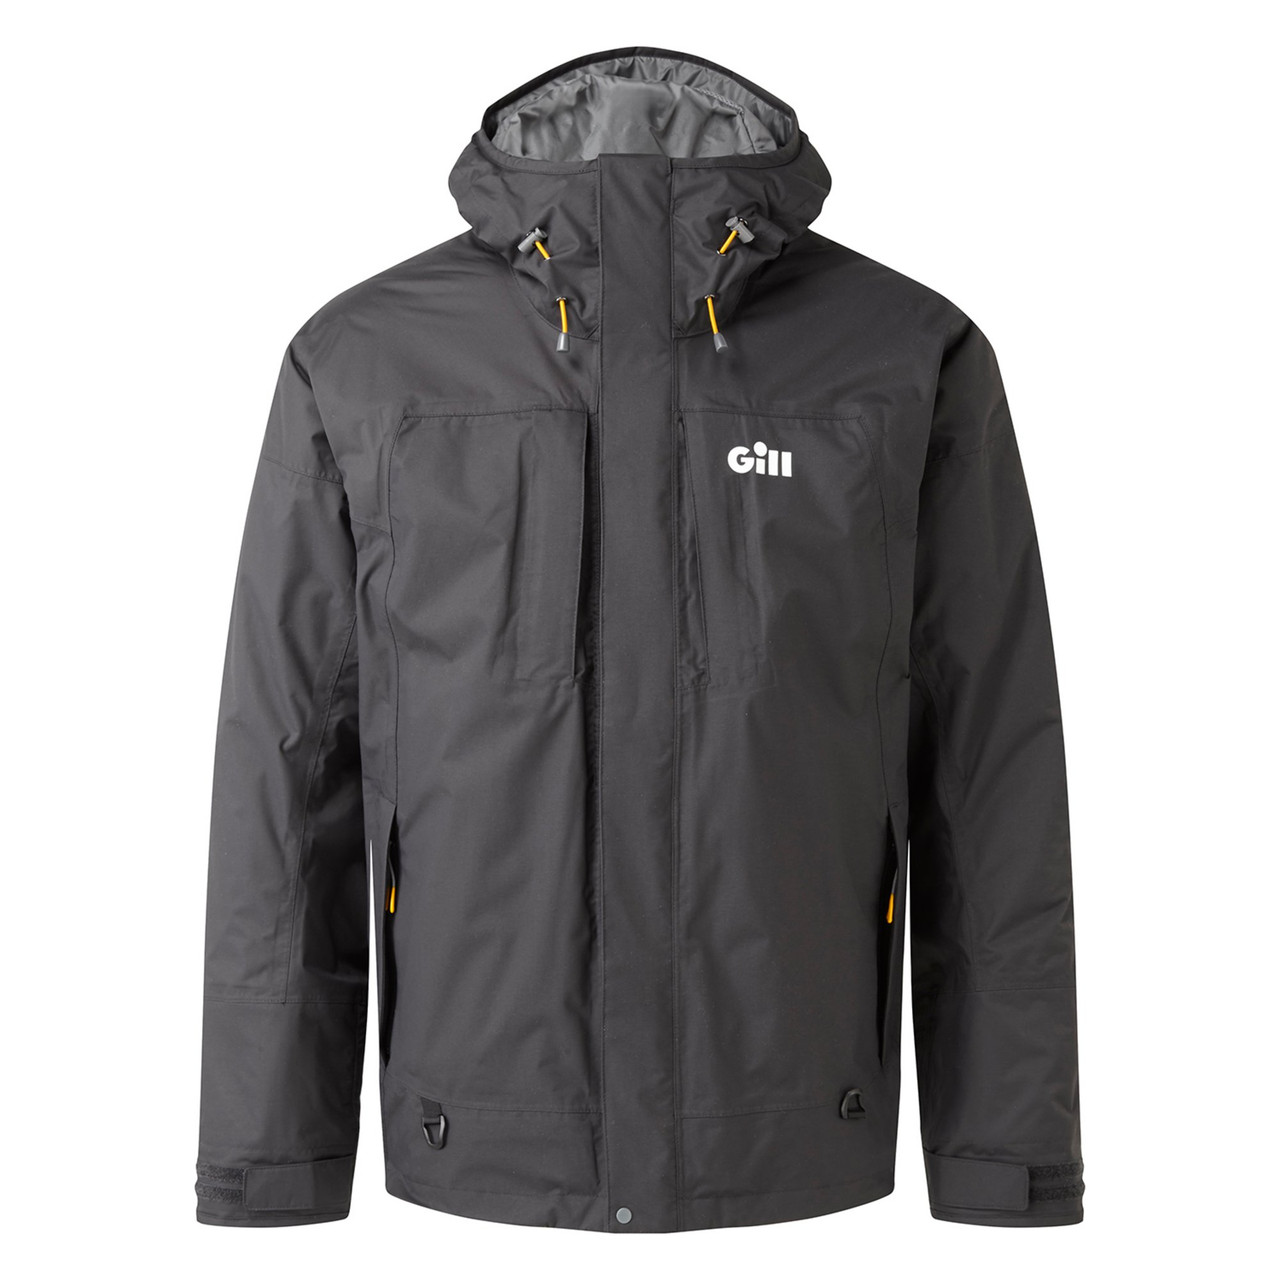 Cold Weather Gear Guide - The Compleat Angler